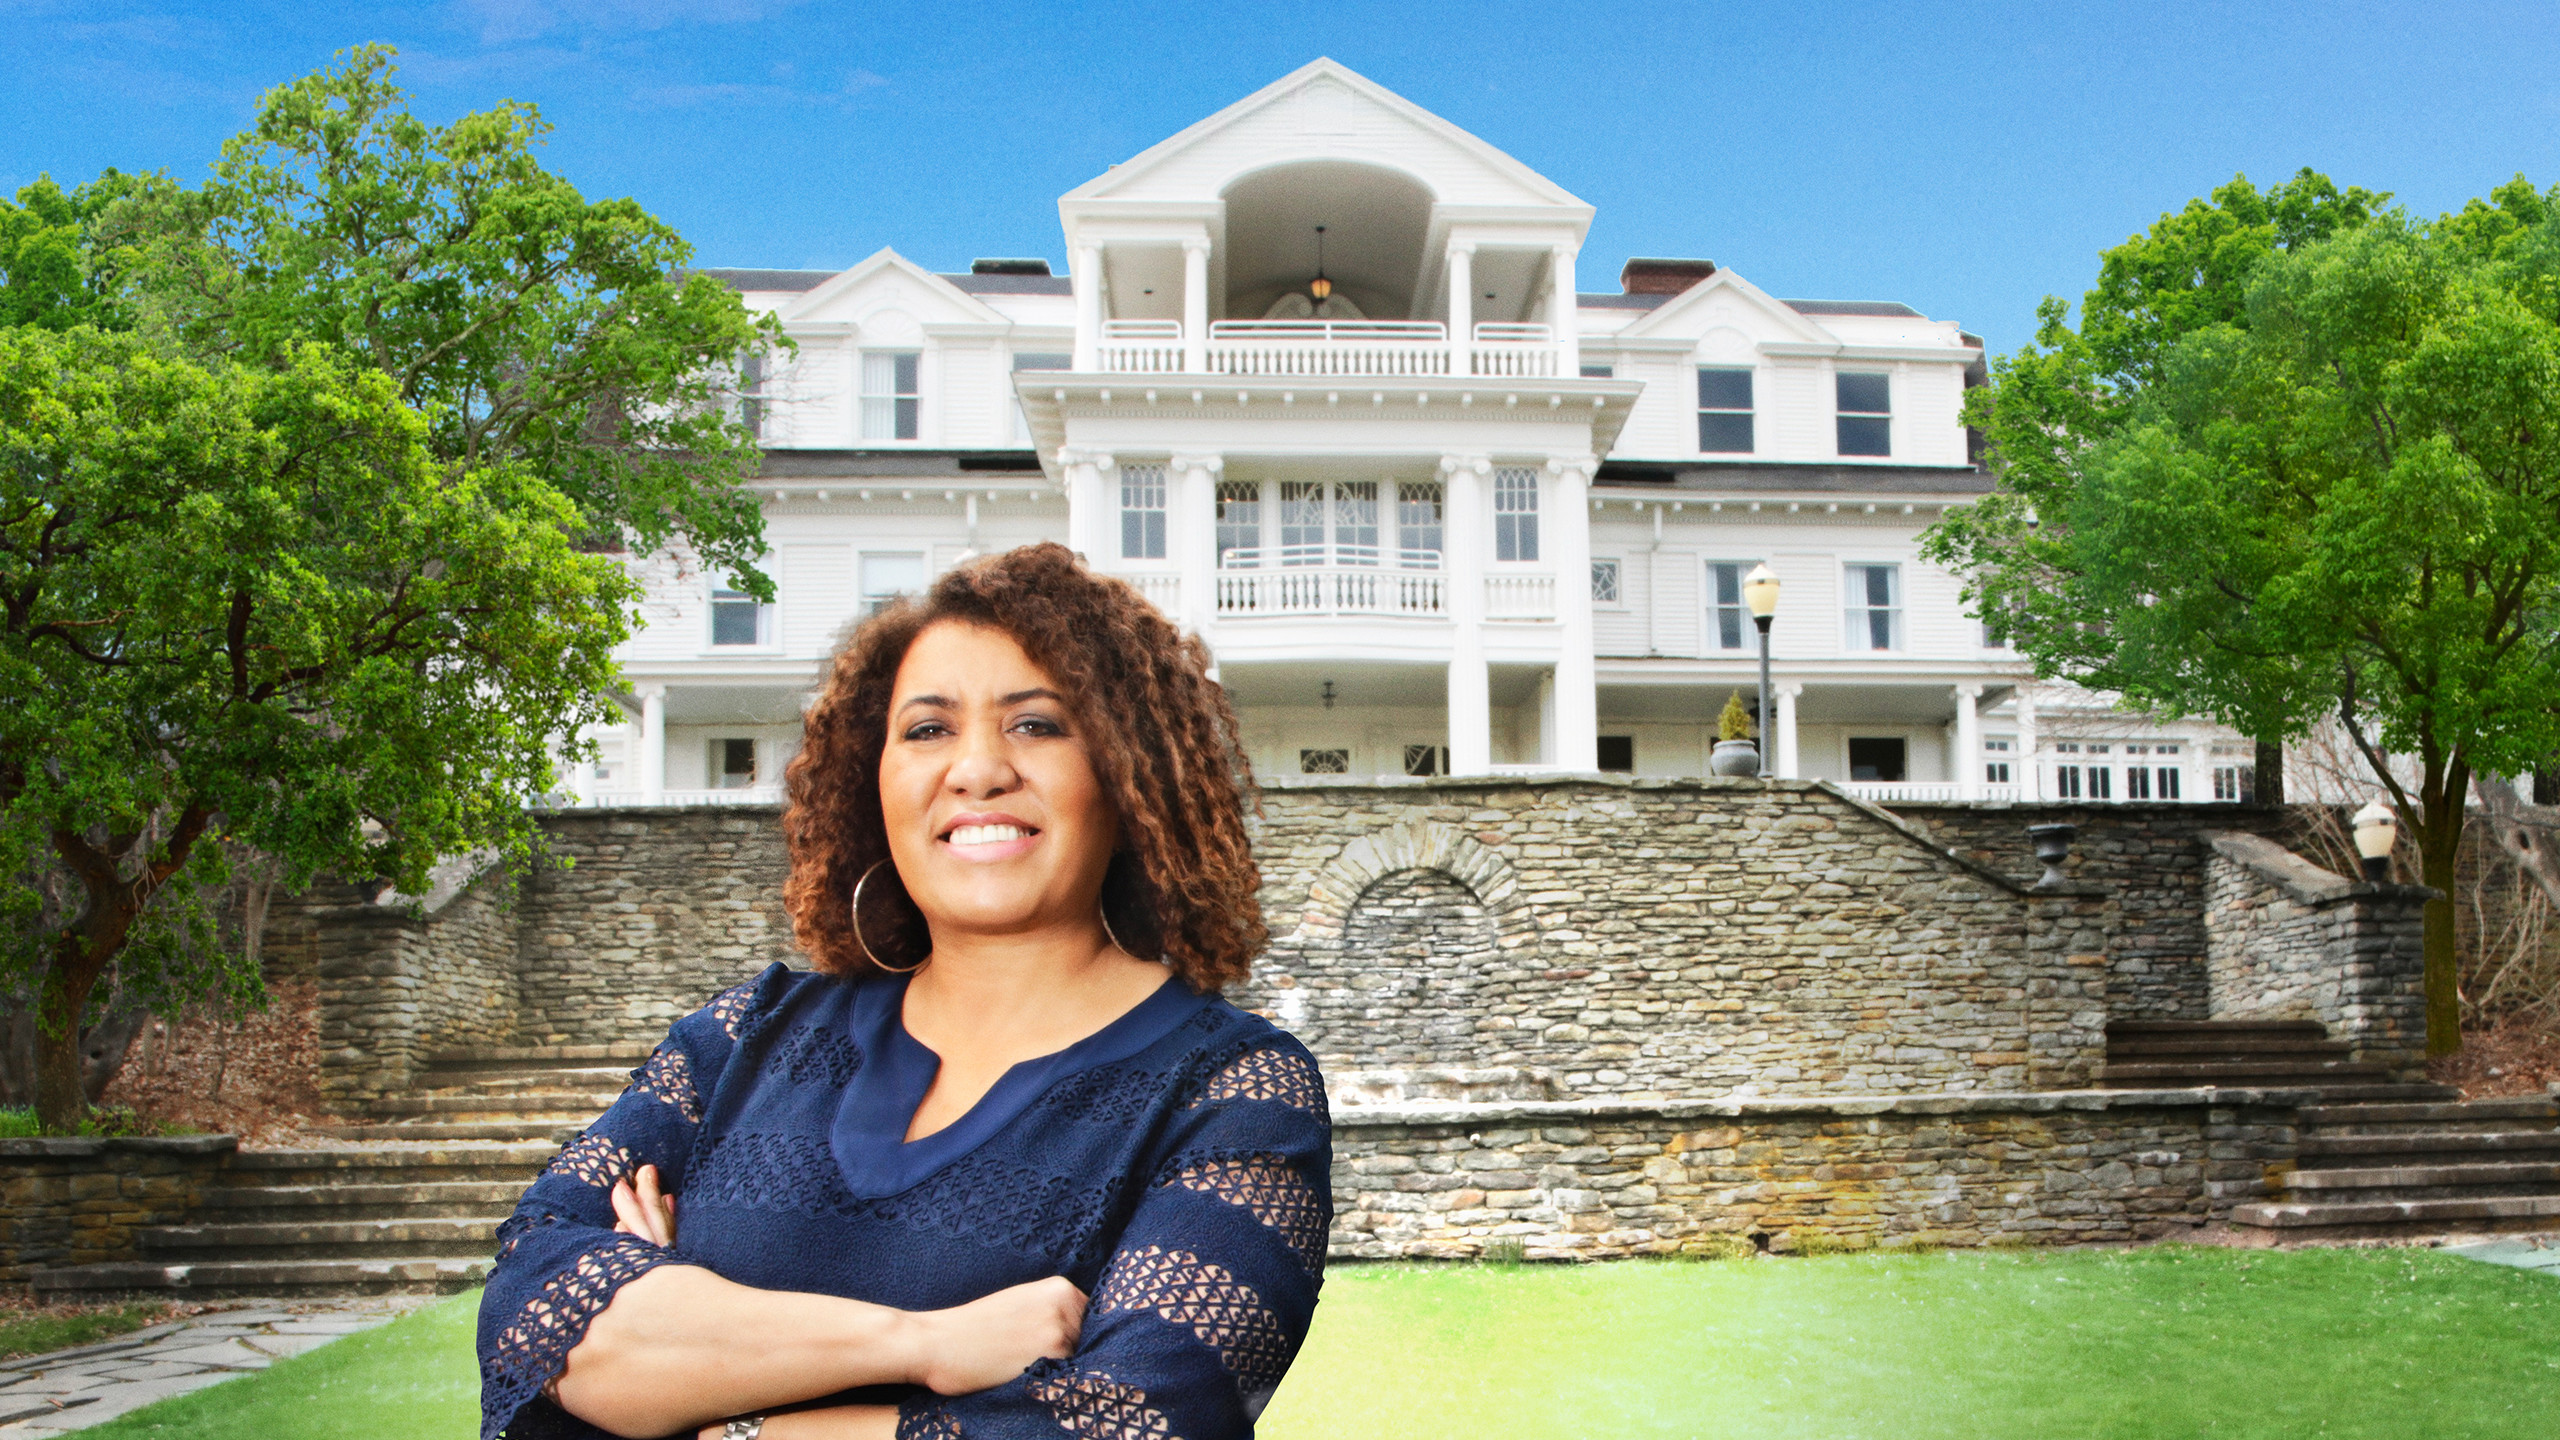 Oprah's OWN Network To Feature Brooklyn Family's B&B in New Docu-series